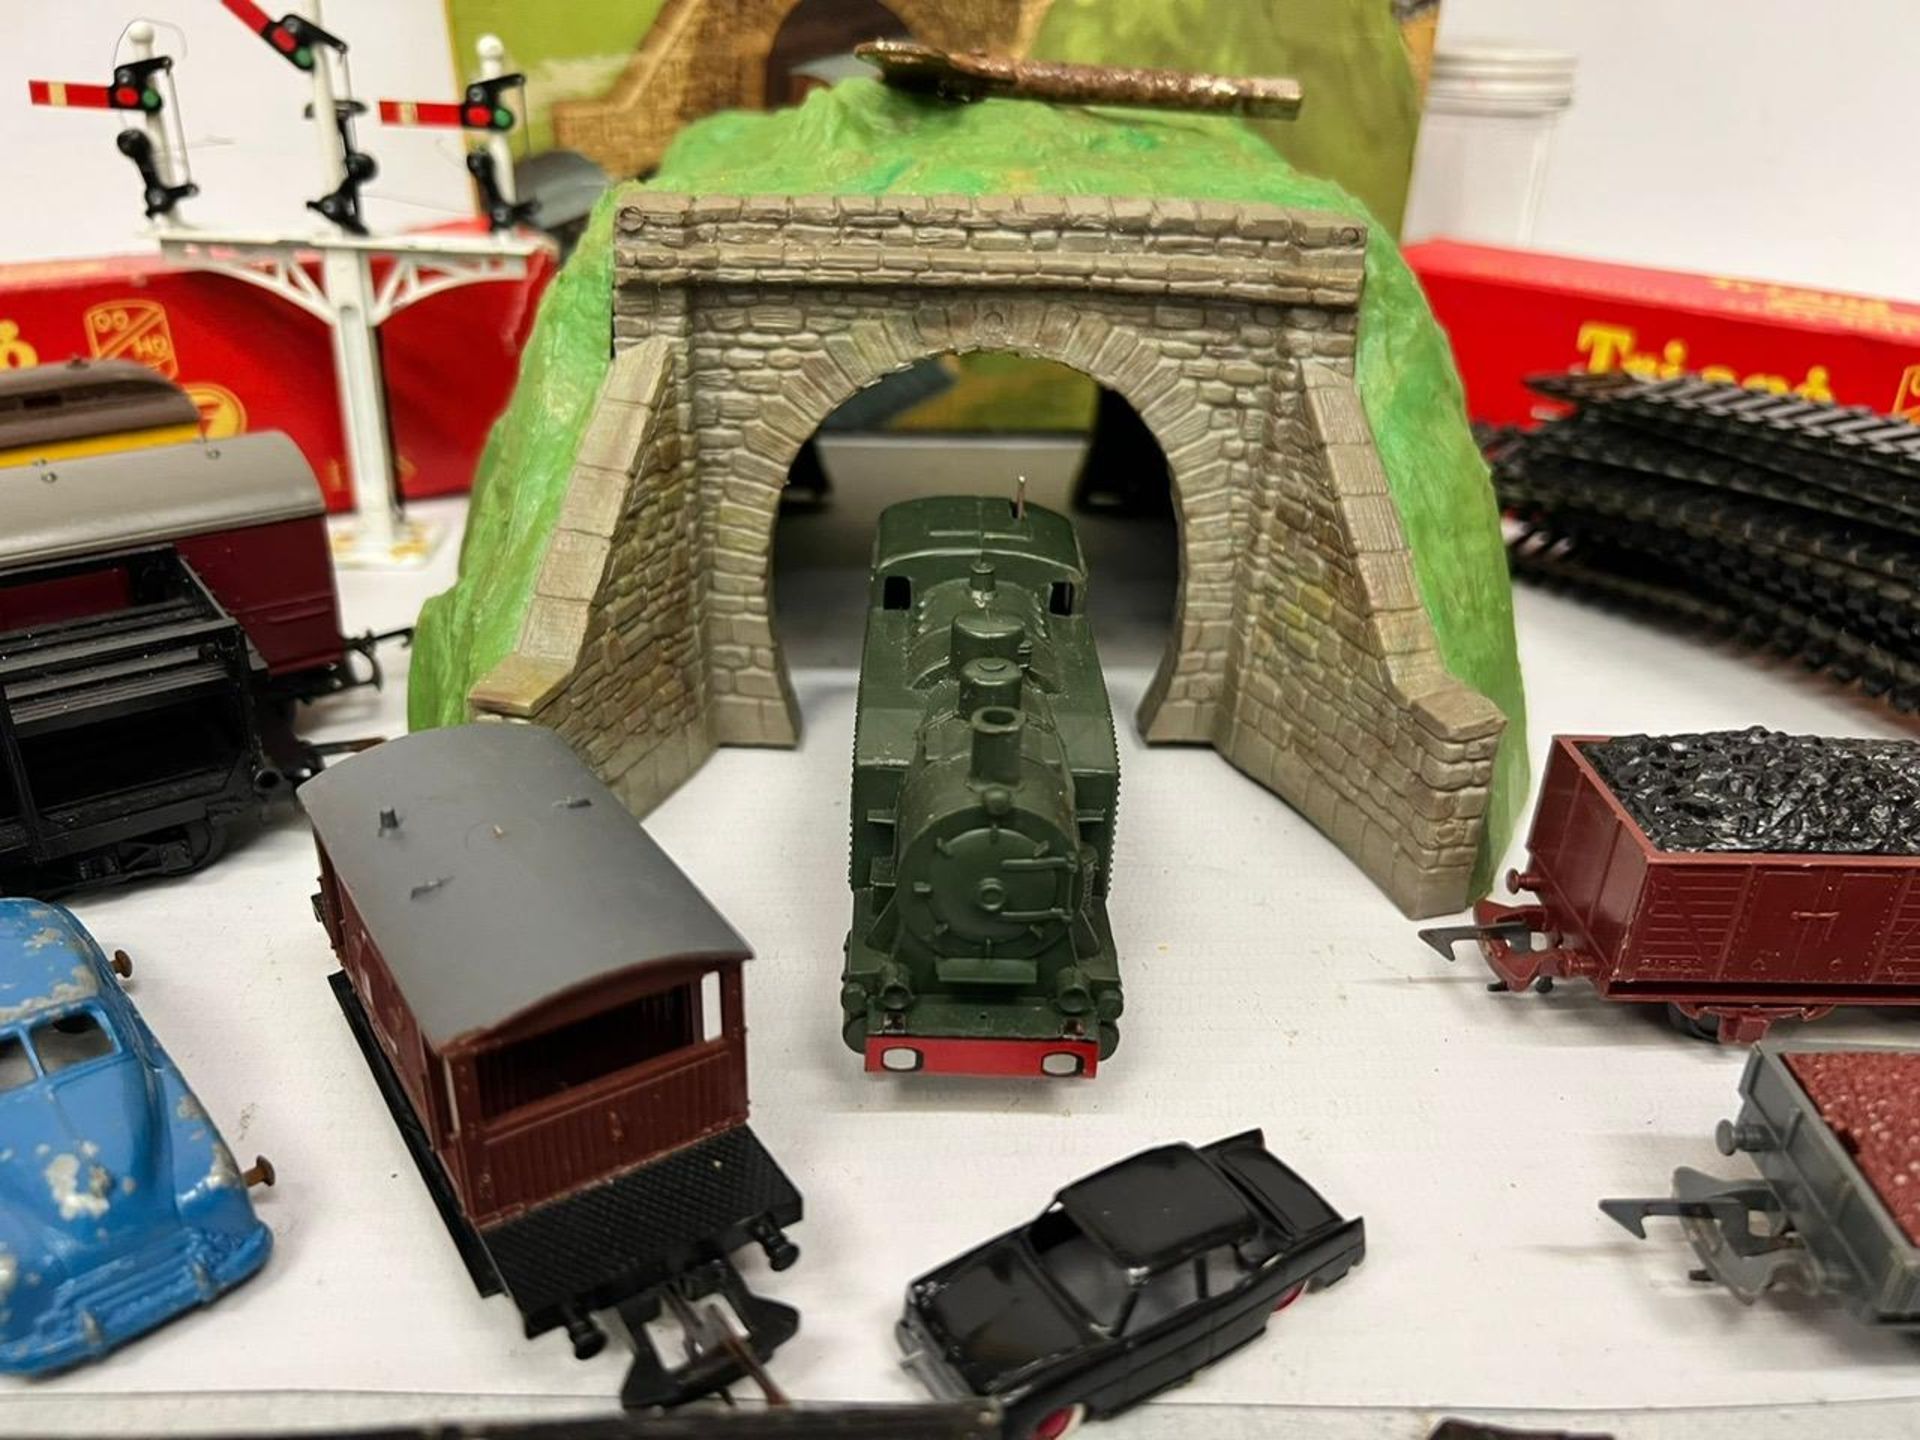 VARIOUS OO GAUGE MODEL RAILWAY ITEMS - A LOCO, CARRIAGES, BOXED TUNNEL, TRACK AND ACCESSORIES - Image 2 of 4